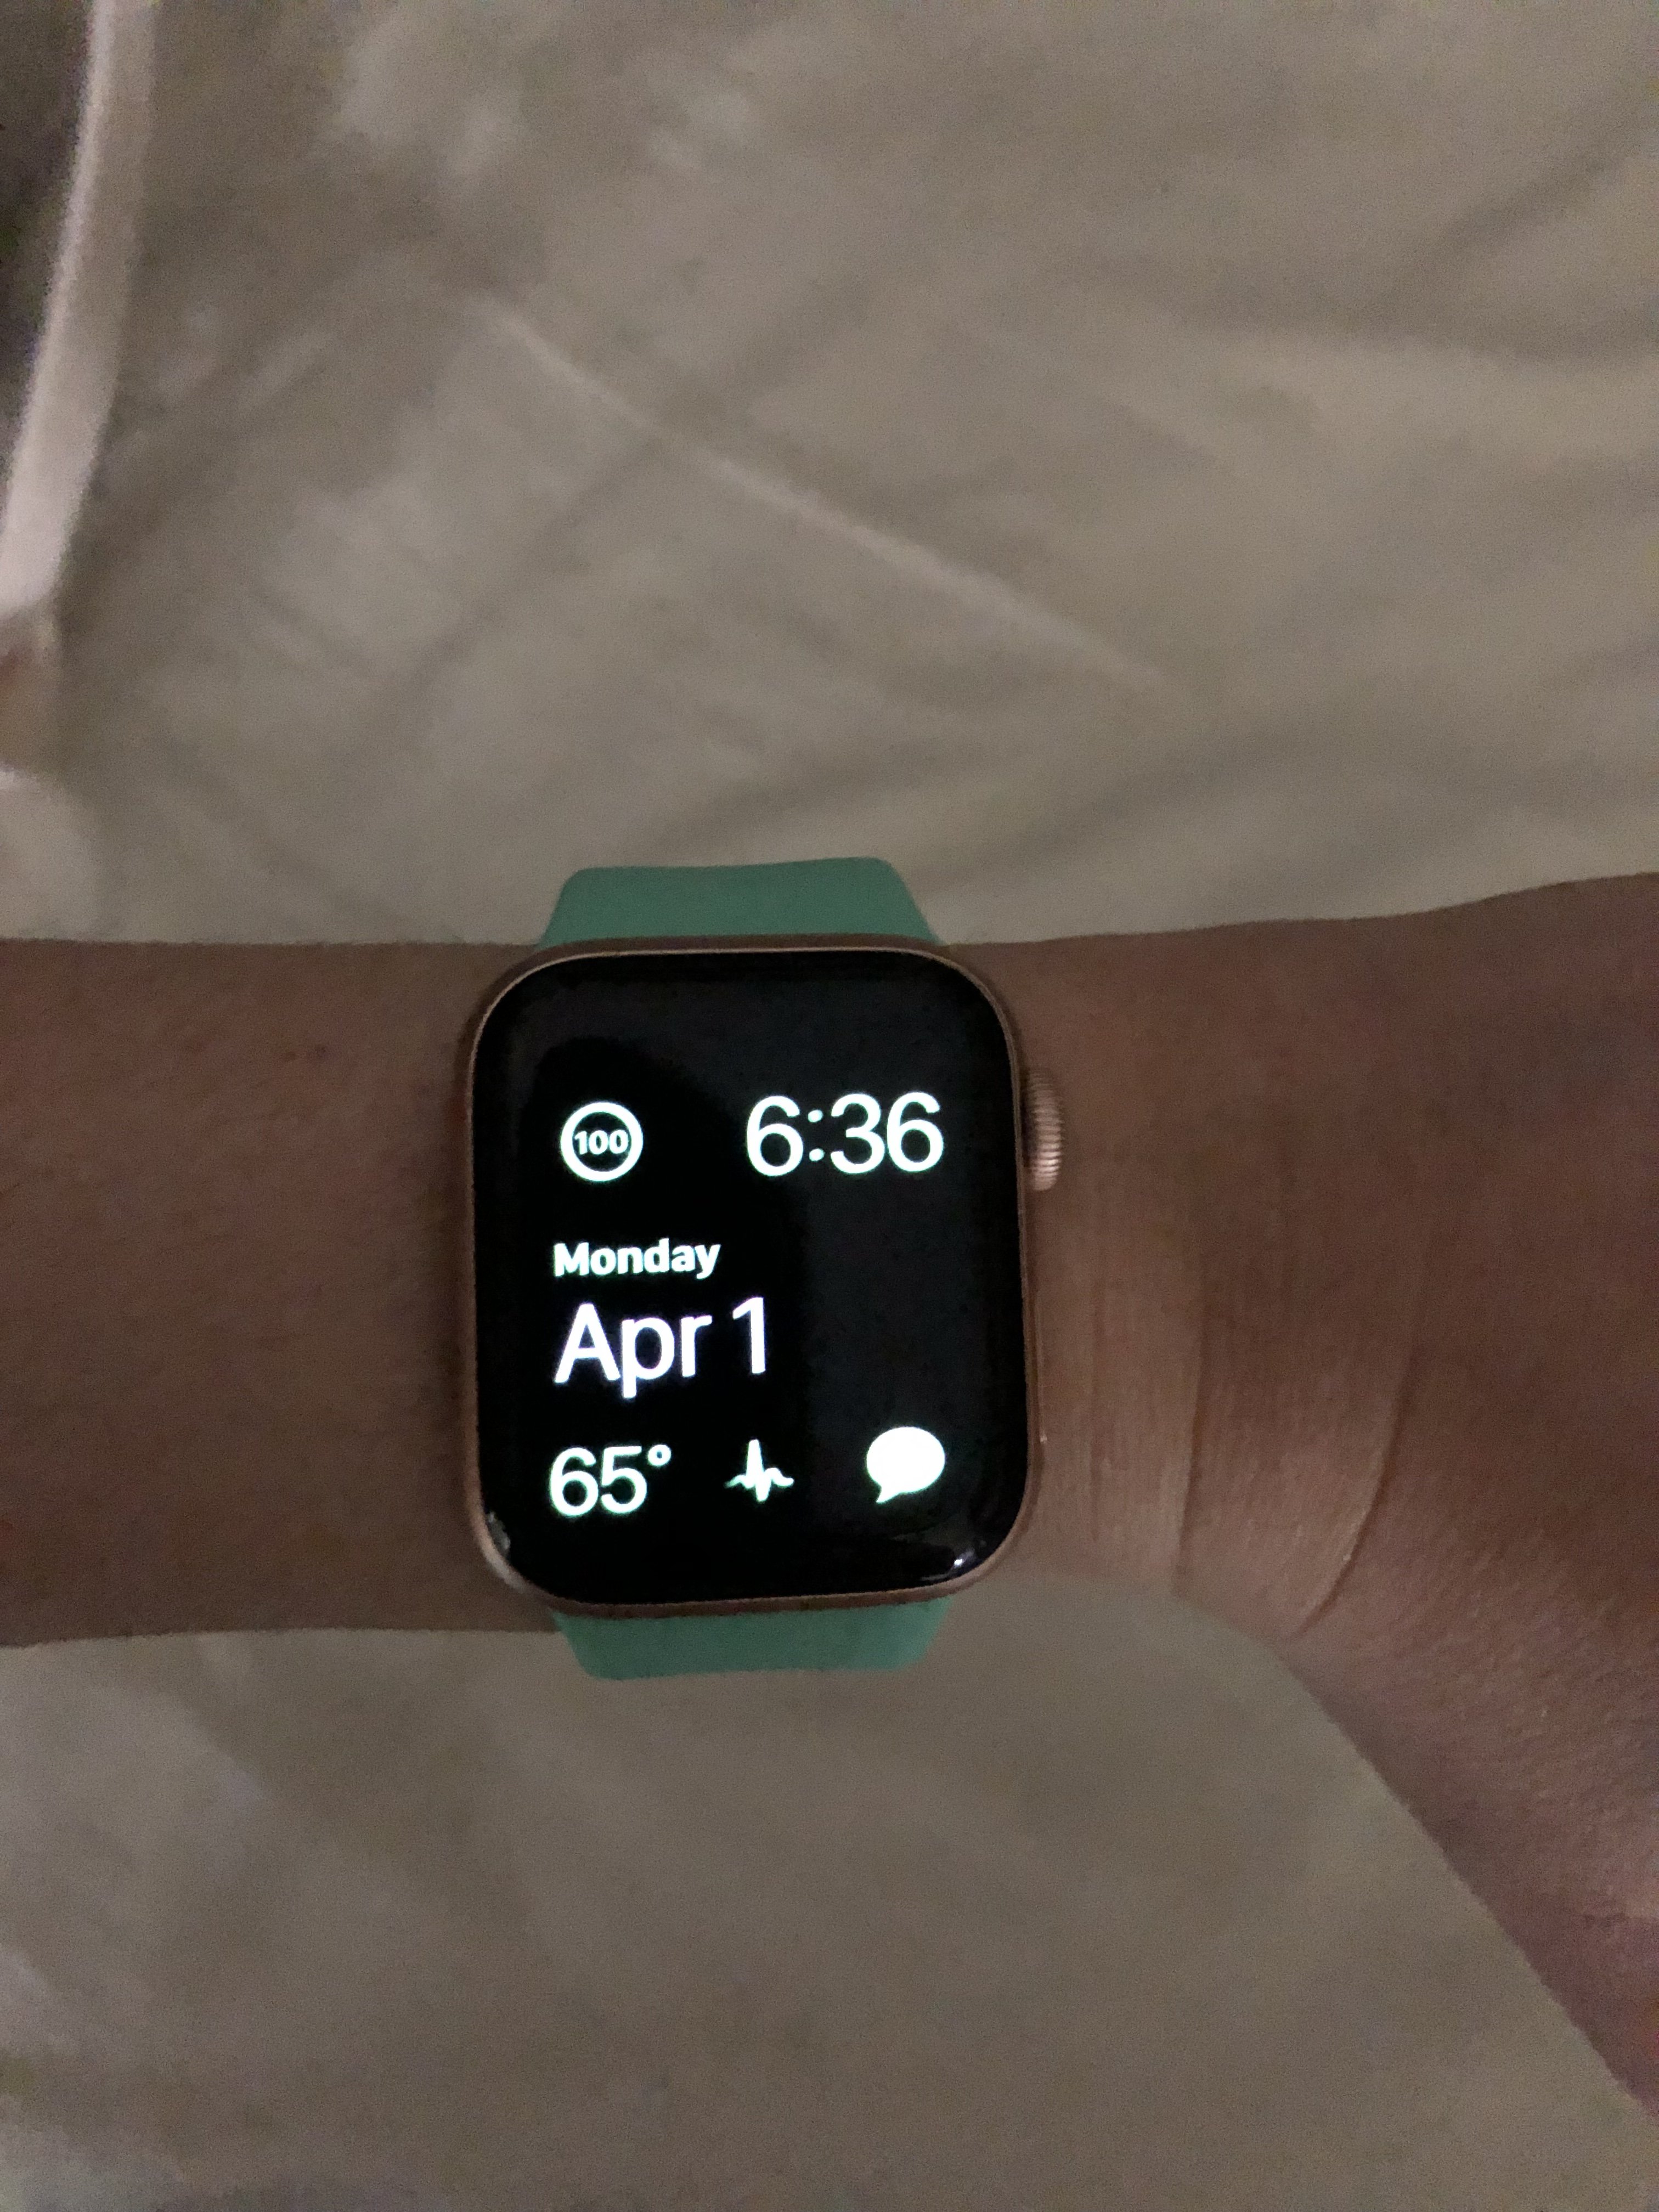 Show off your Apple Watch | Page 422 | MacRumors Forums